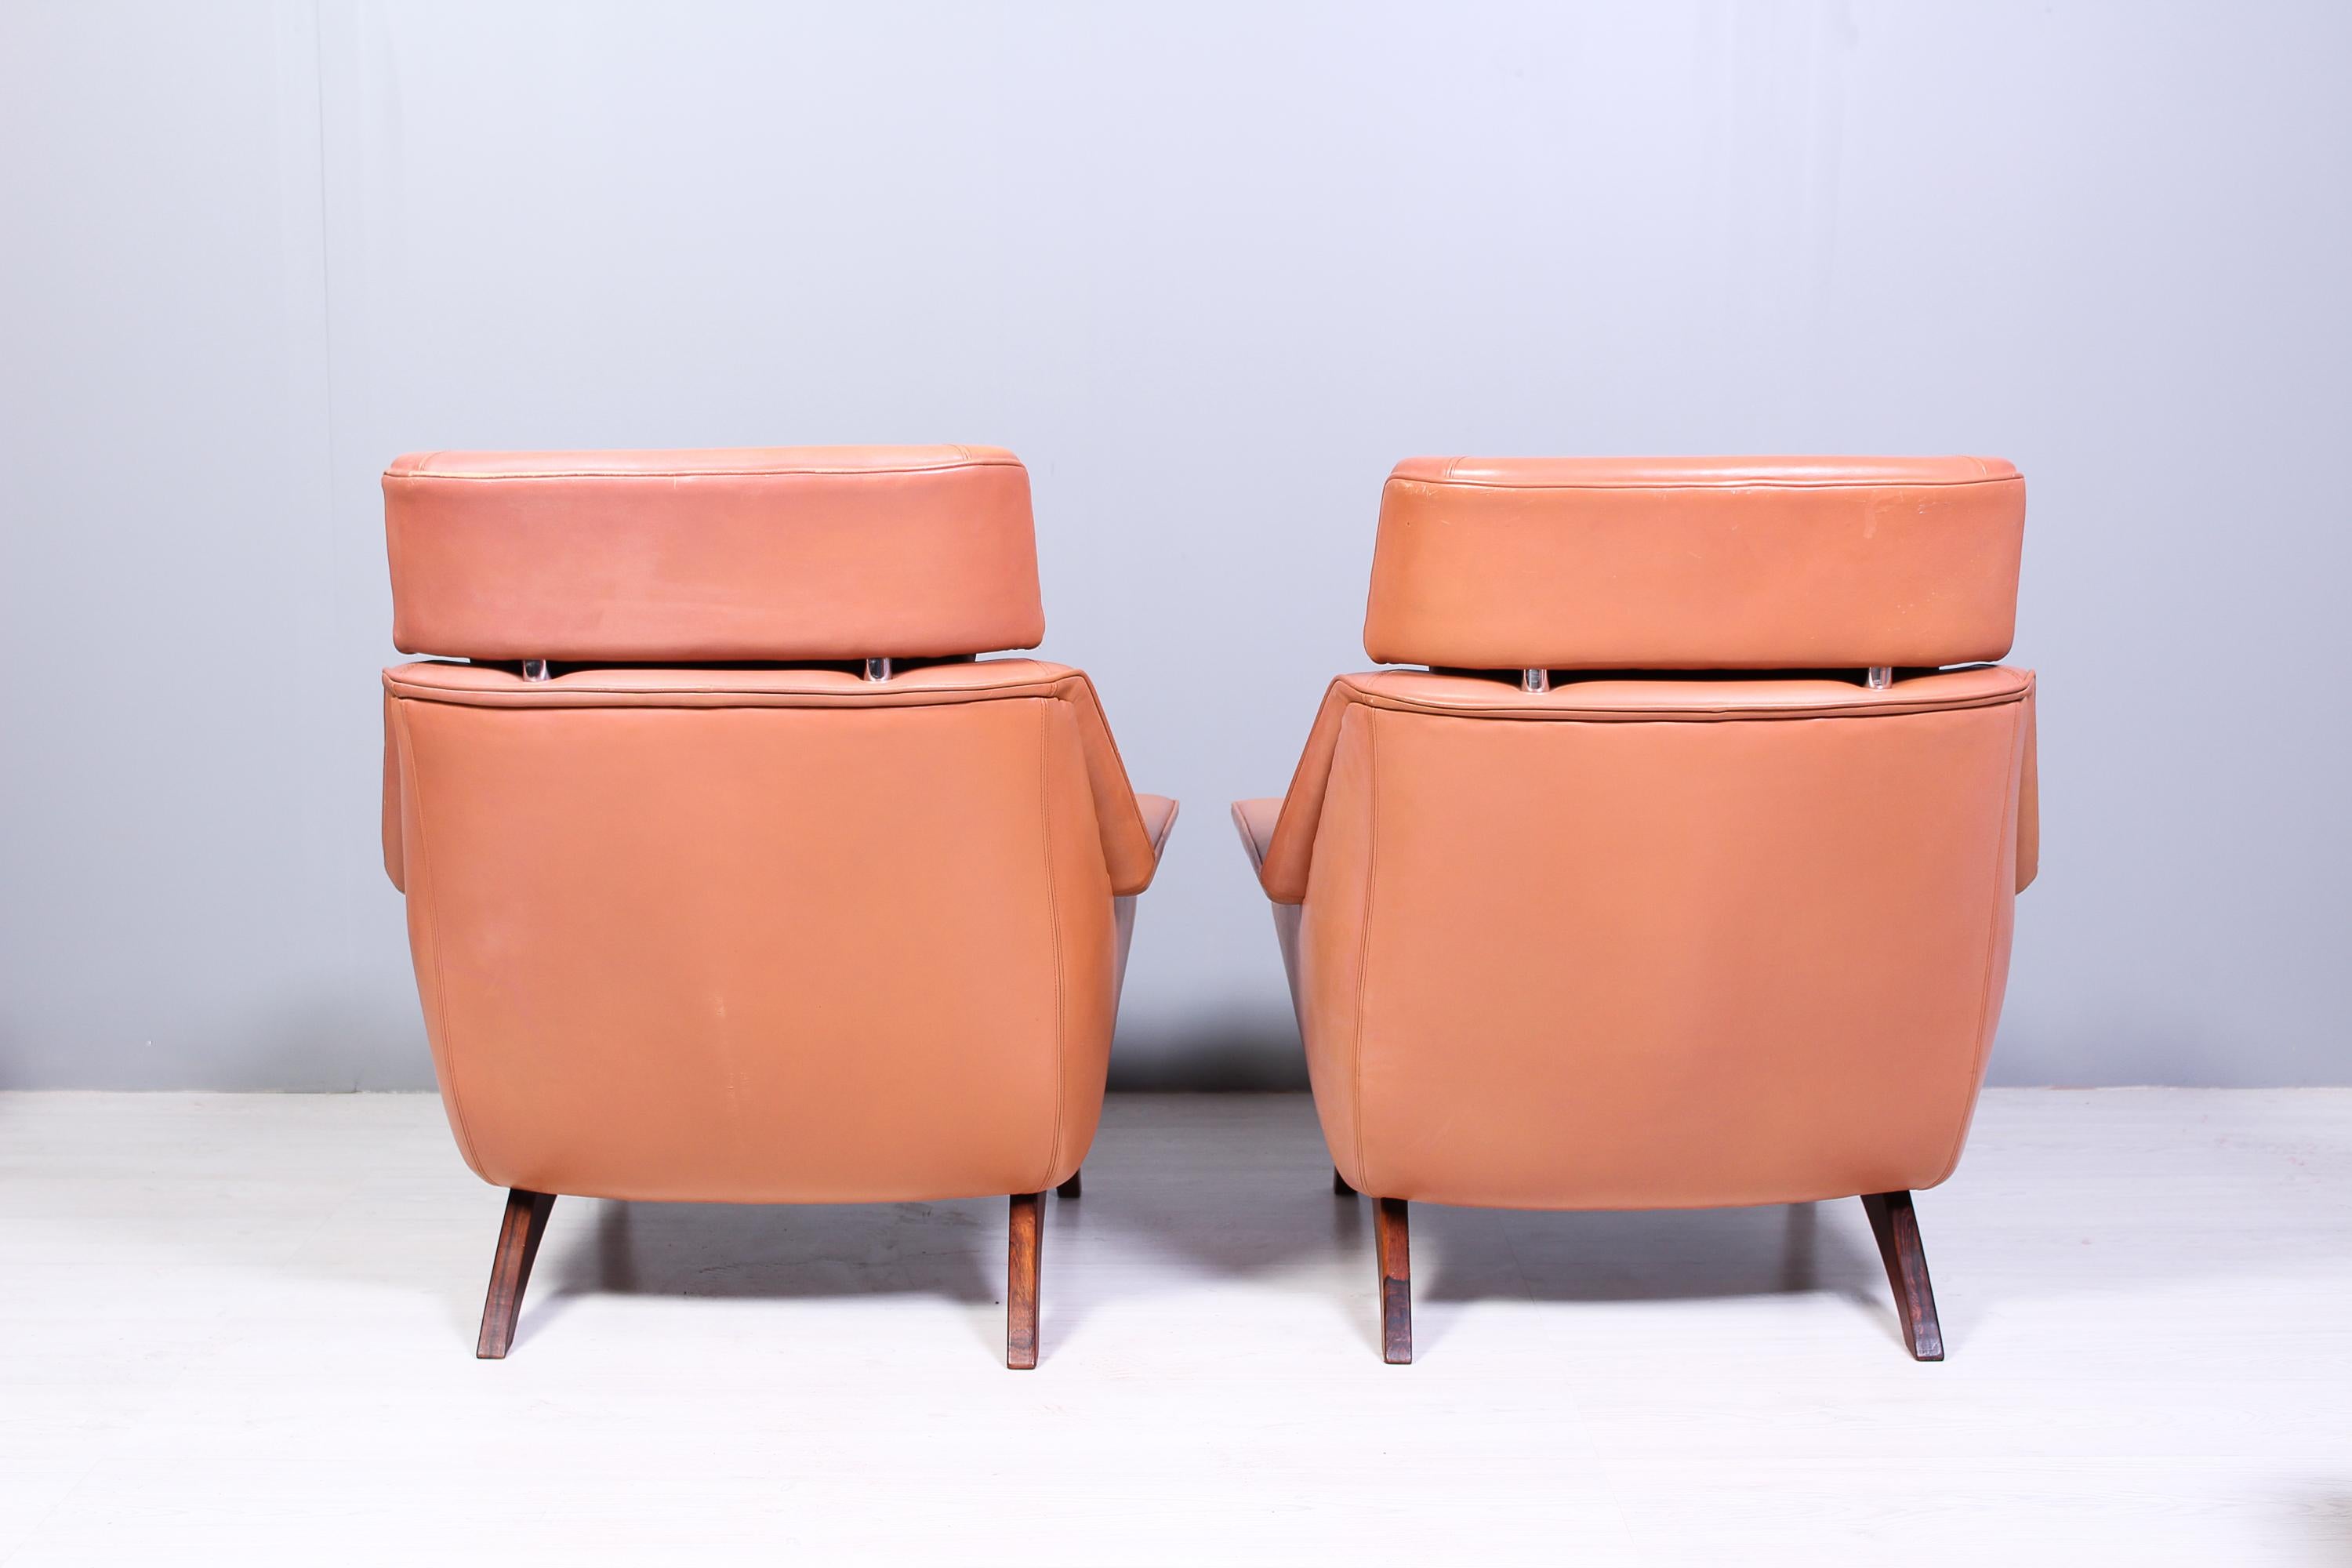 Leather & Rosewood Lounge Chairs and Ottoman by Werner Langenfled, Denmark 1960s For Sale 3